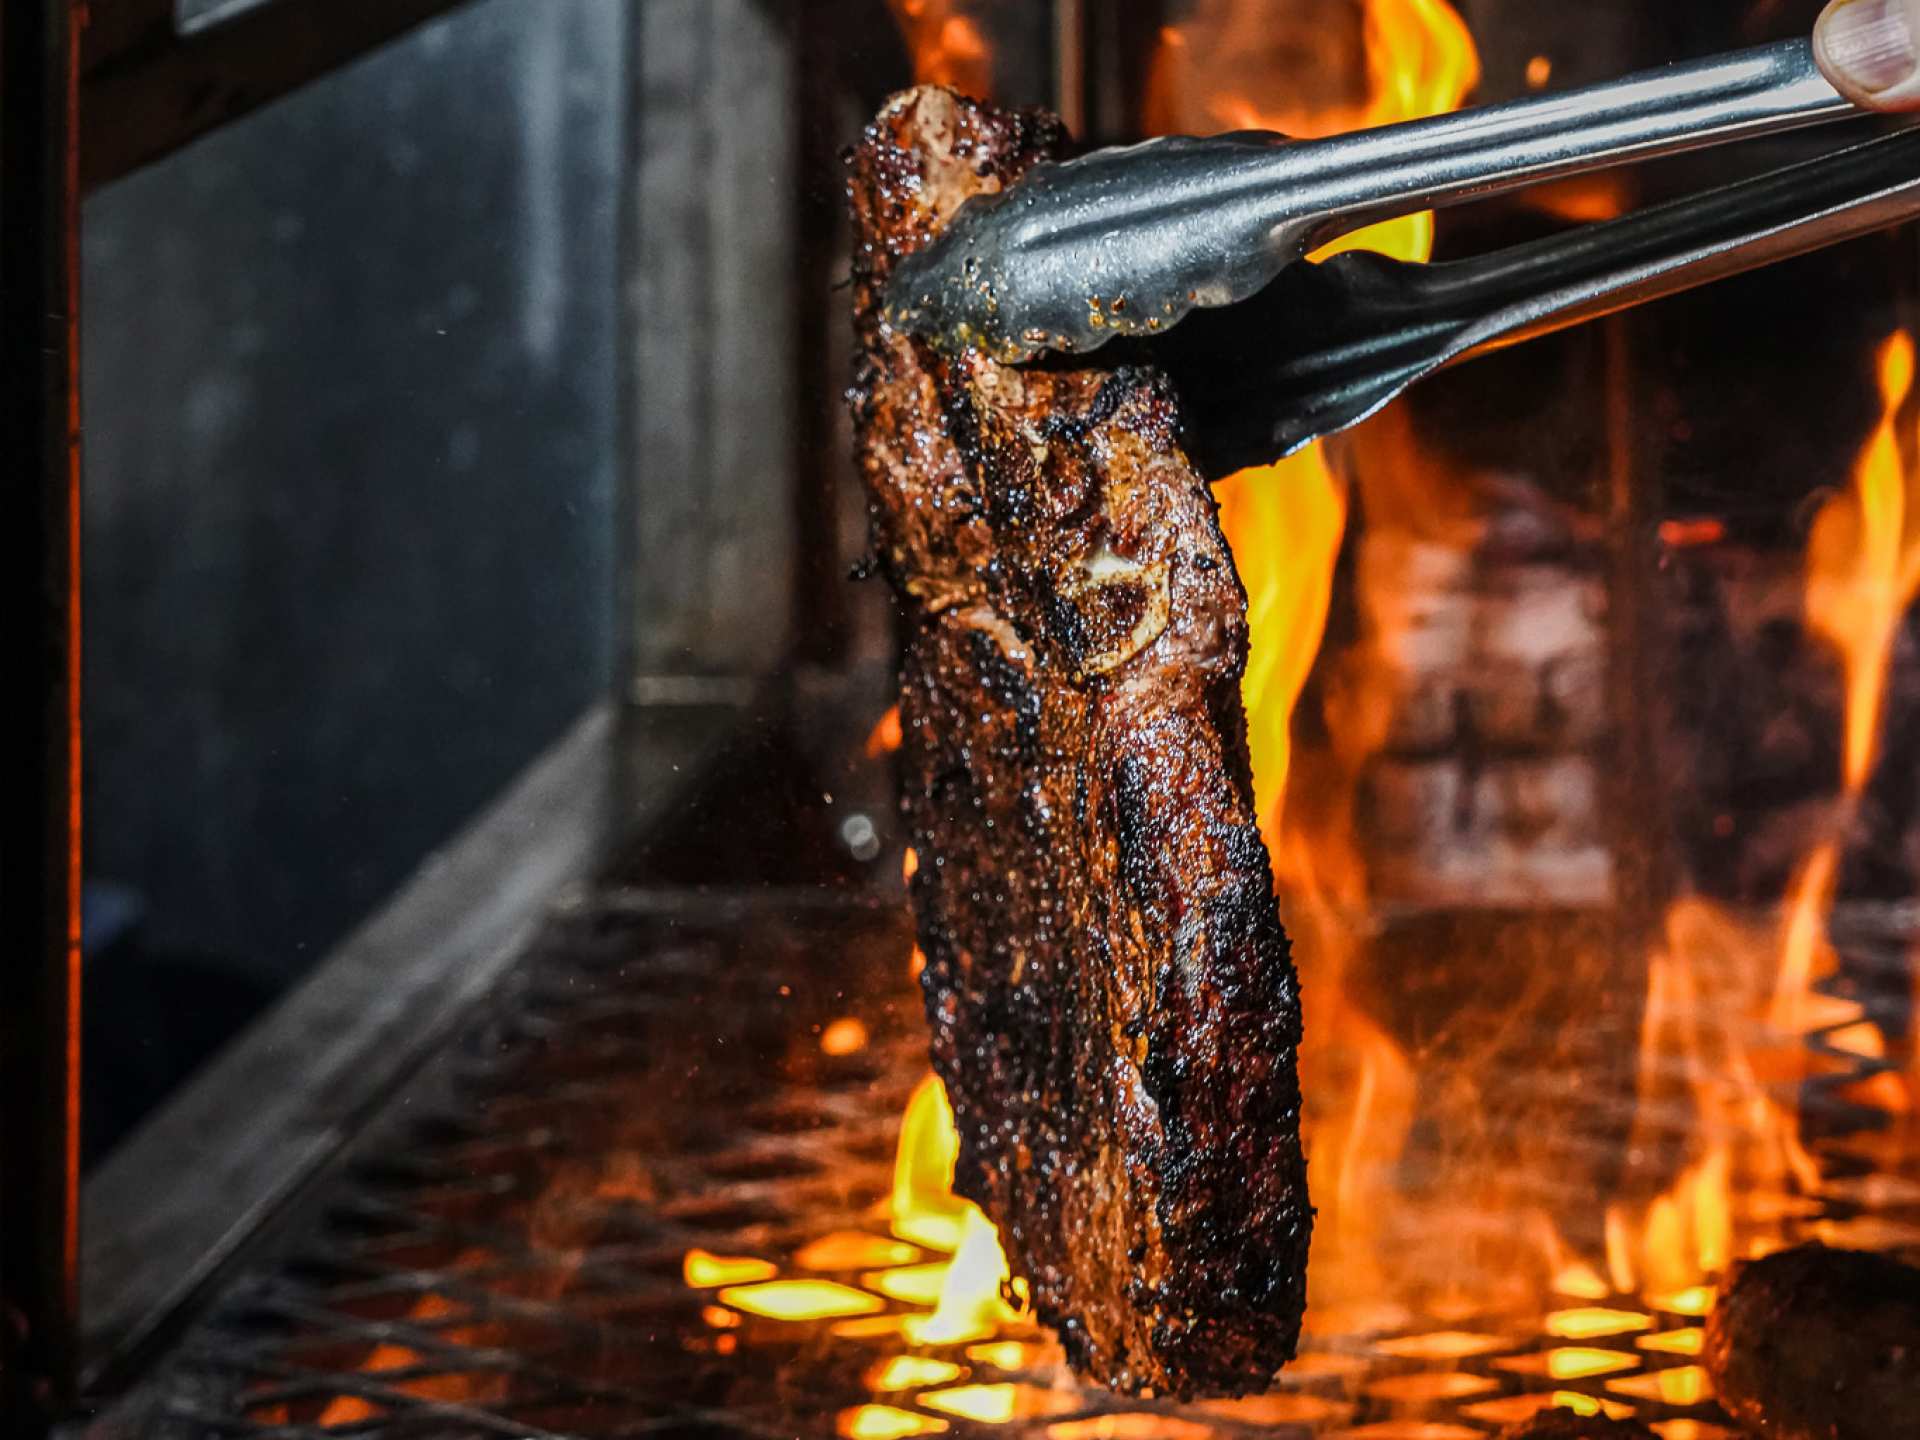 Summerlicious Toronto | A steak on the charcoal barbecue at Baro